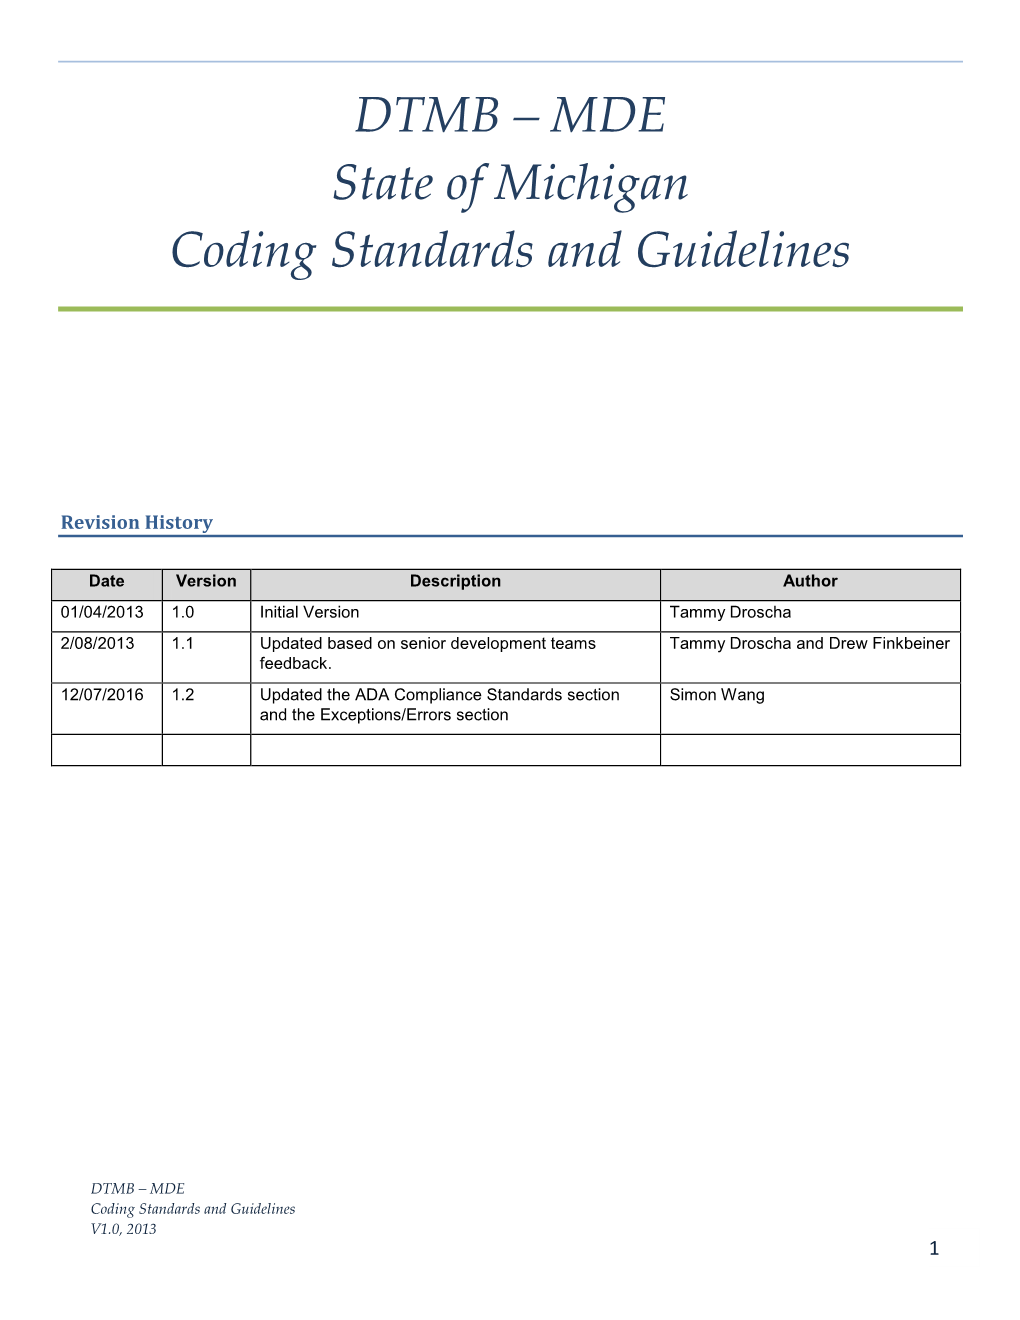 DTMB – MDE State of Michigan Coding Standards and Guidelines